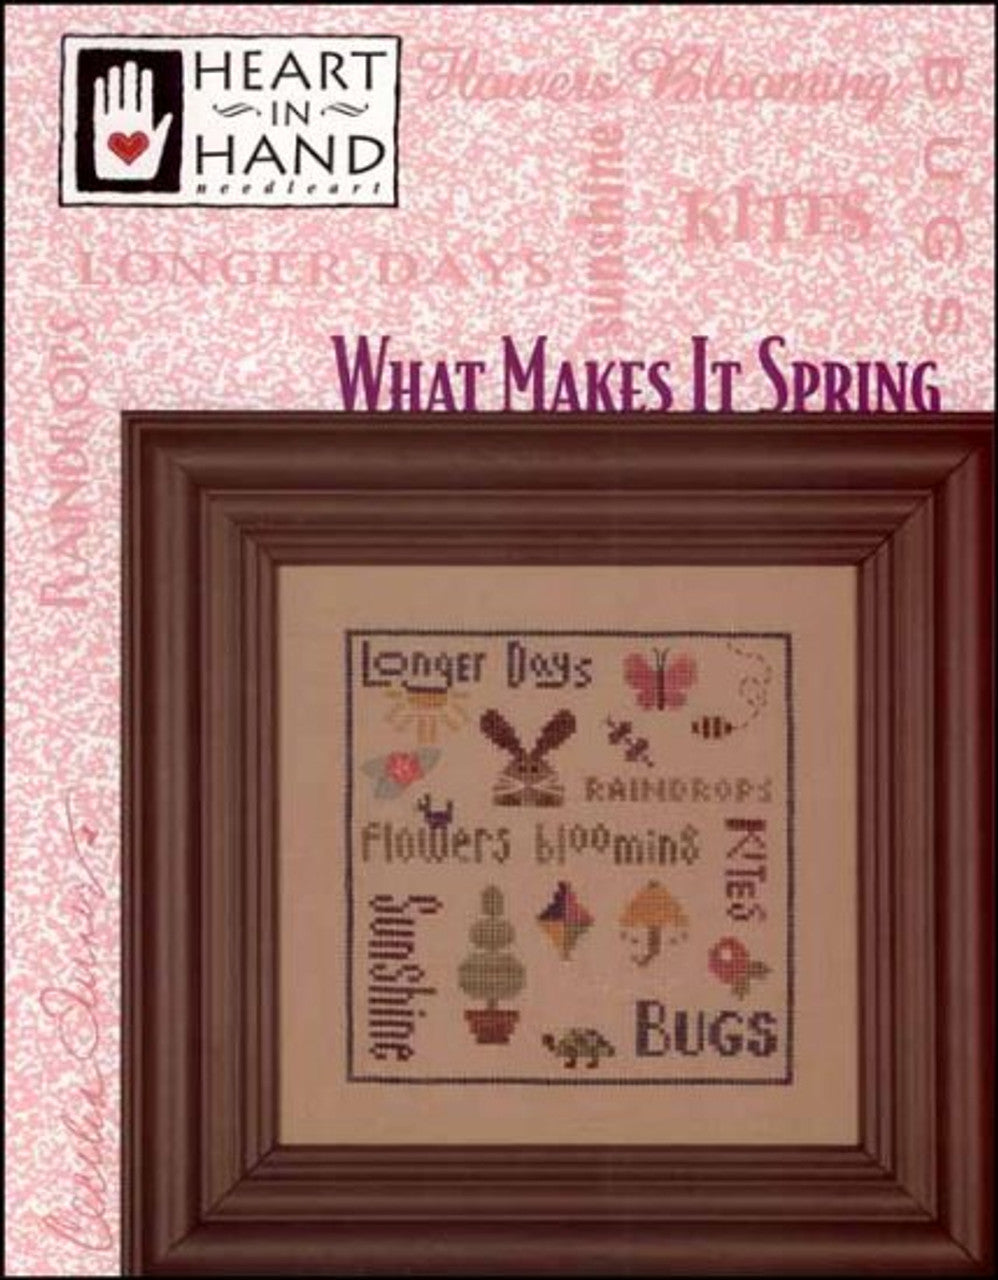 What Makes It Spring by Heart in Hand